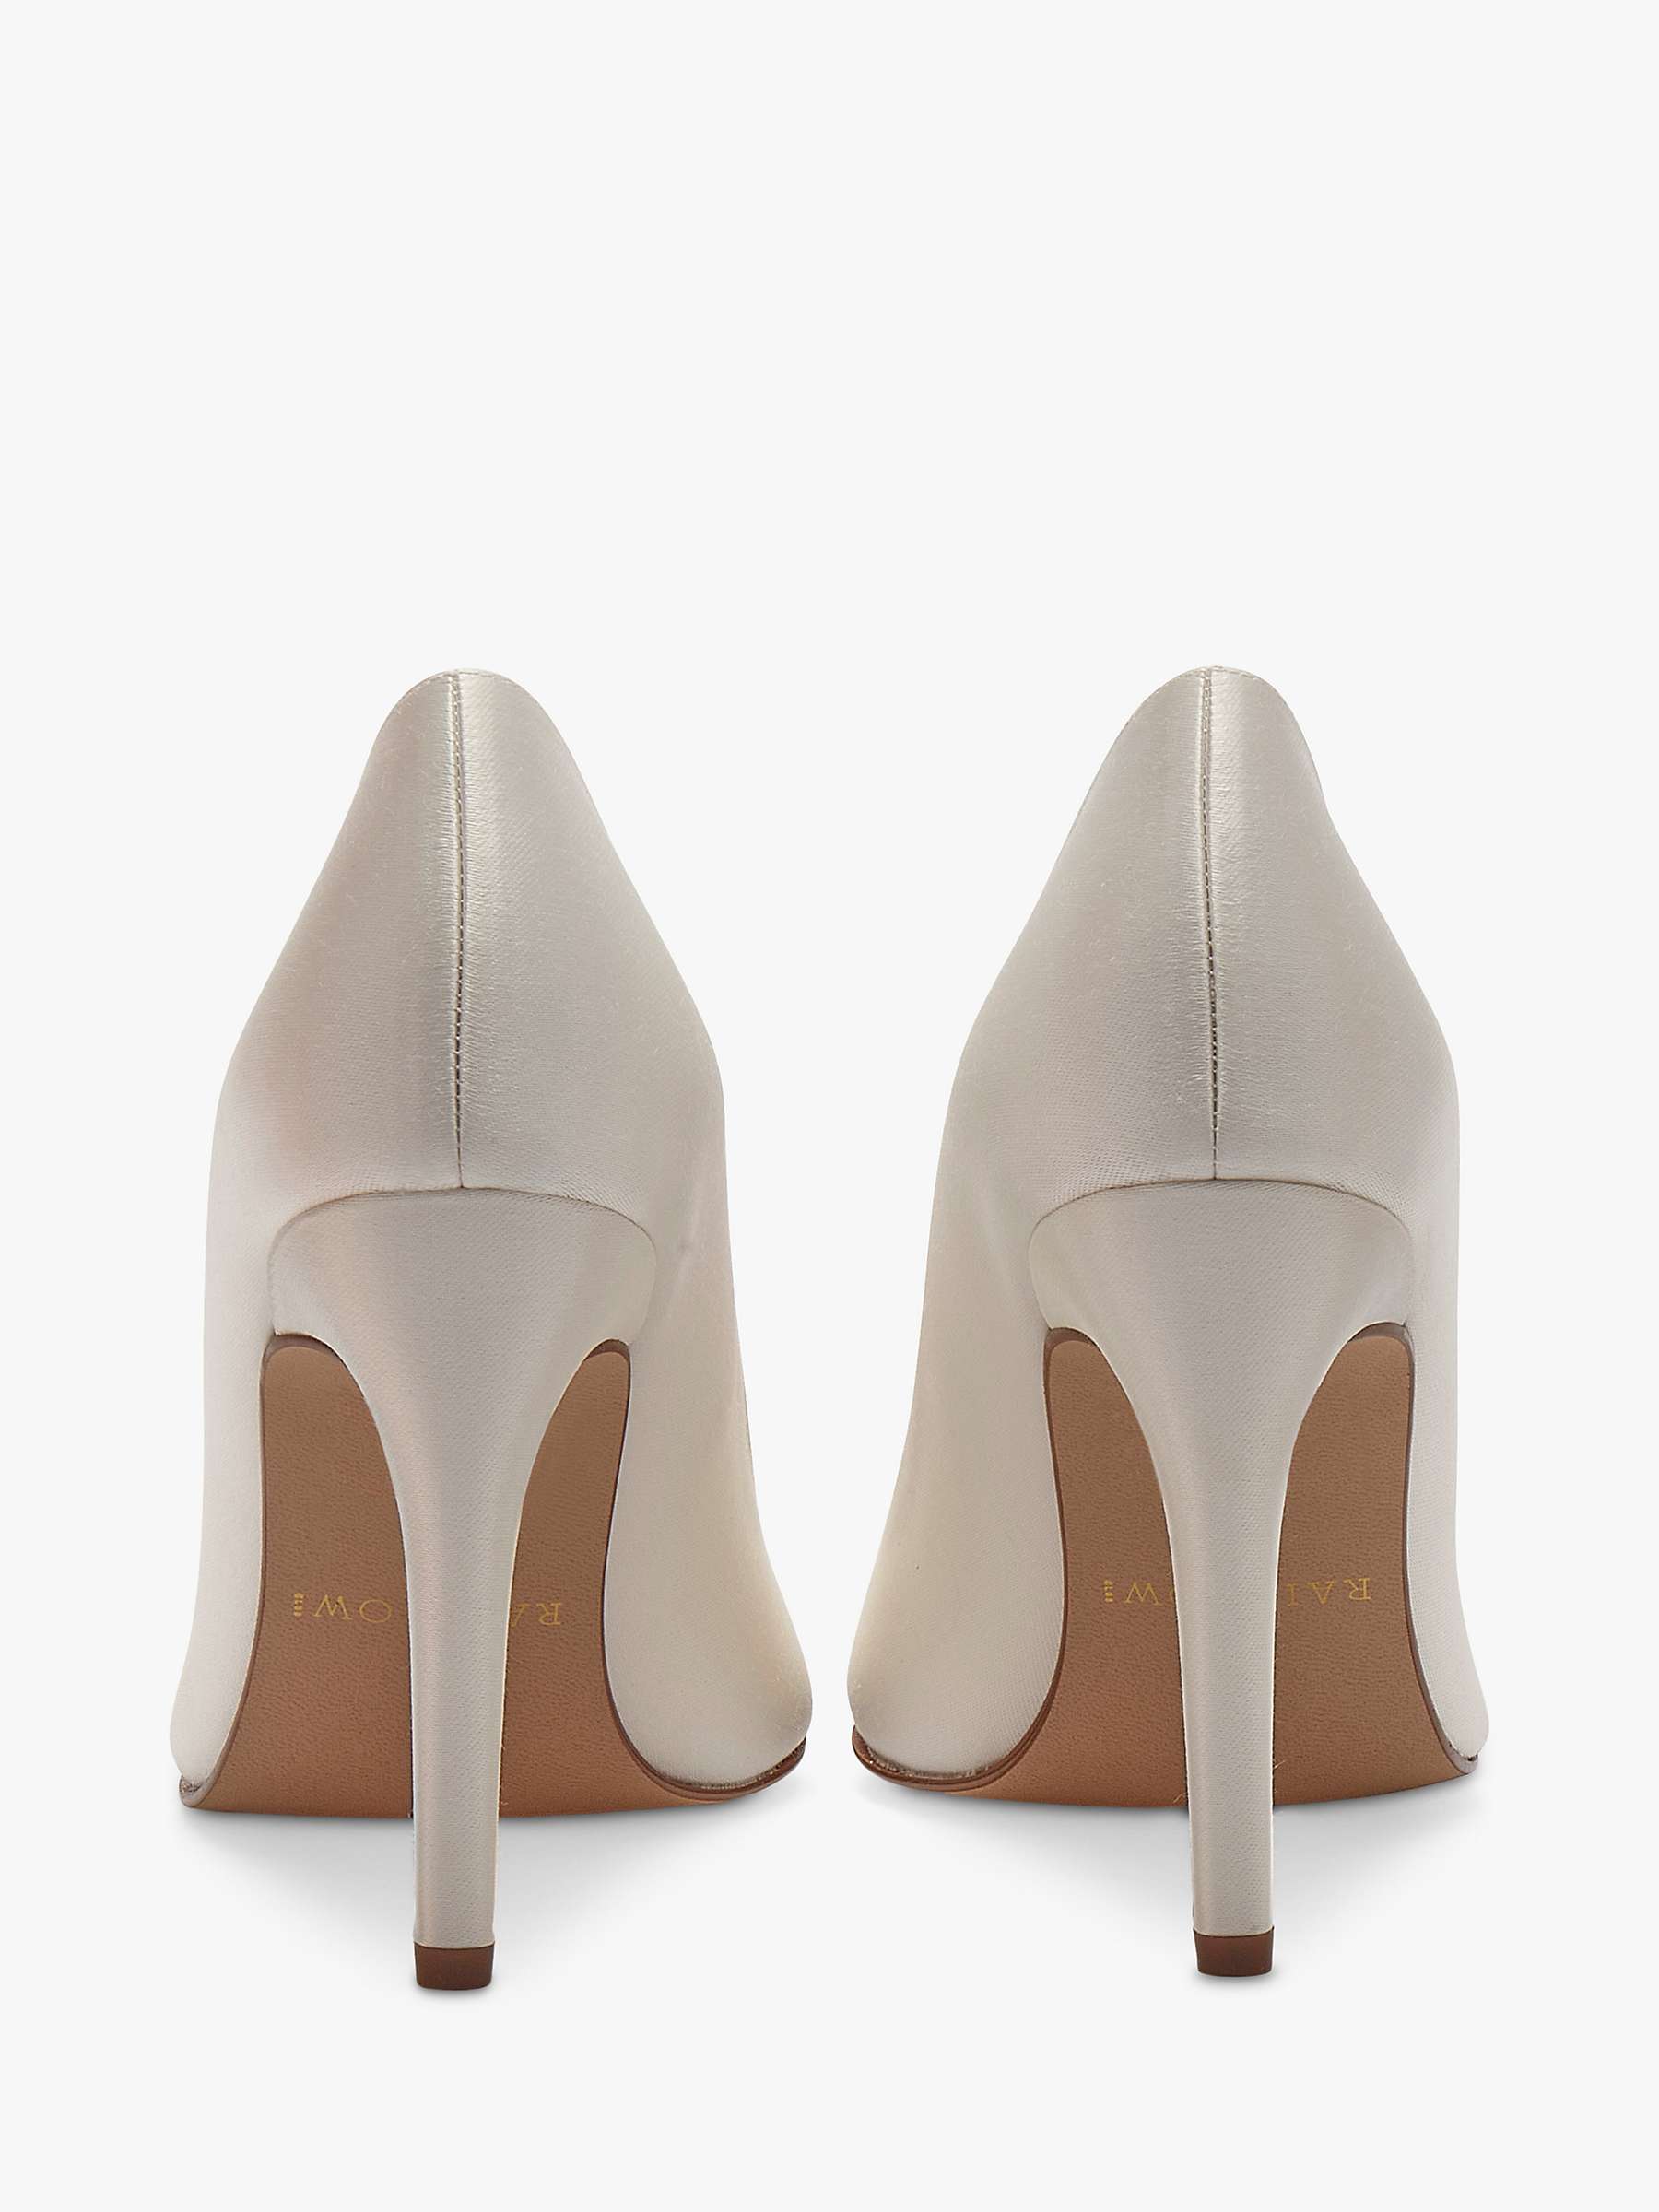 Buy Rainbow Club Coco Pointed Court Shoes, Ivory Satin Online at johnlewis.com